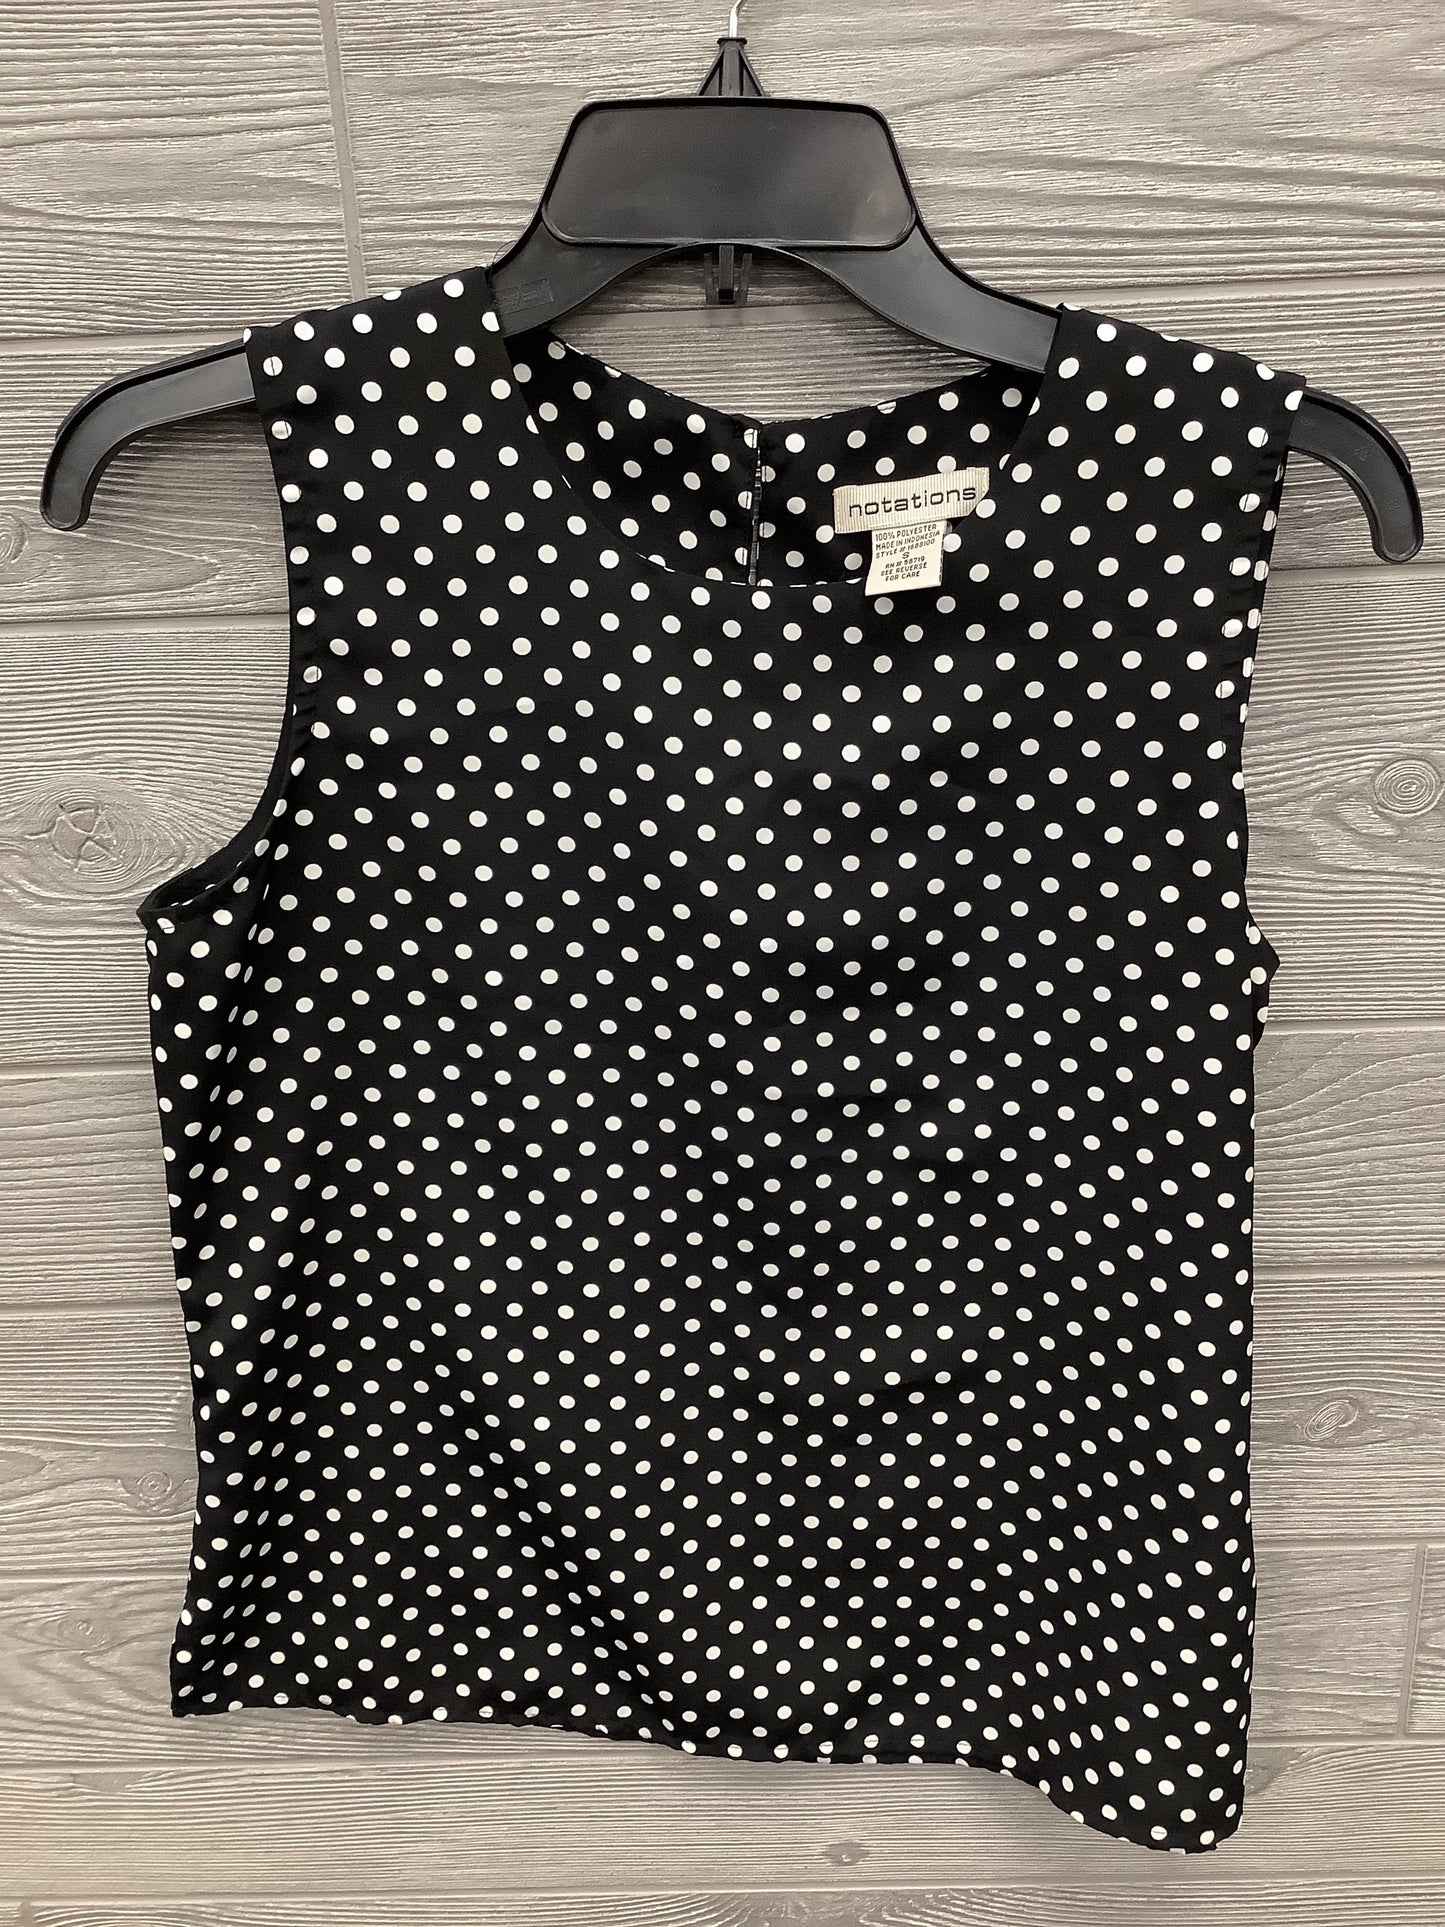 SLEEVELESS TOP SIZE S BY NOTATIONS